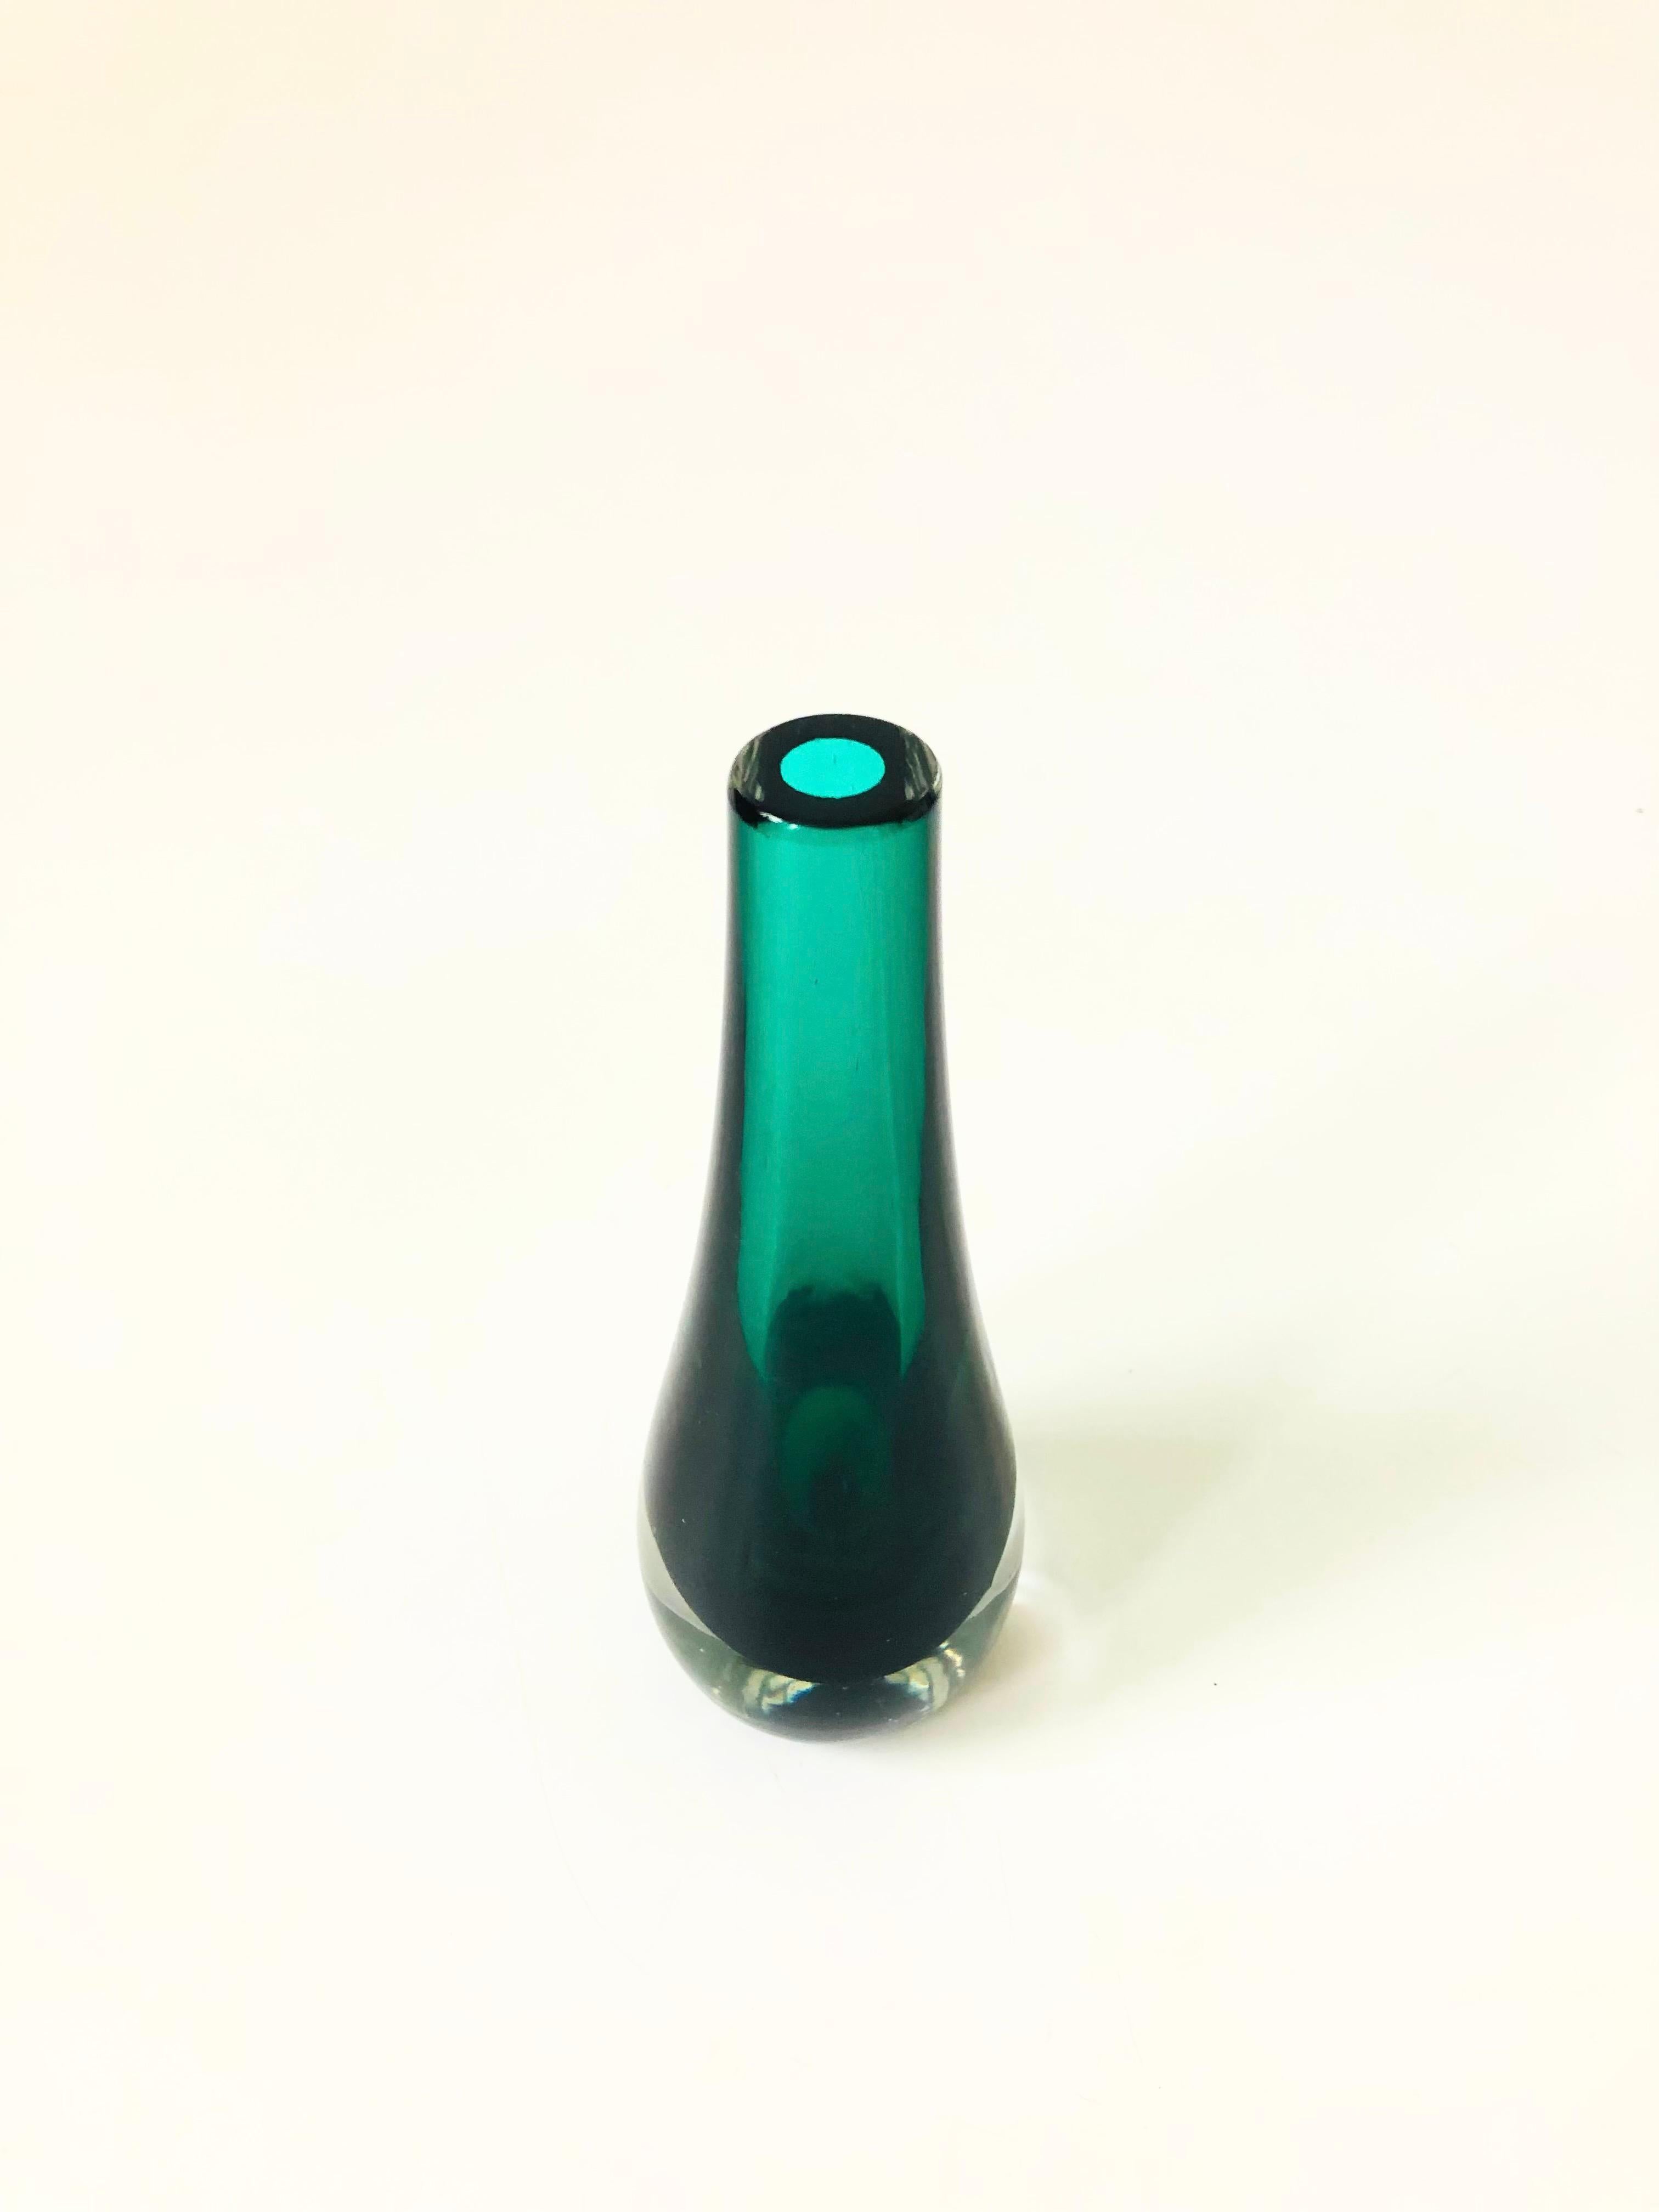 A beautiful vintage sommerso Italian art glass vase. Features a vibrant green interior surrounded by thick clear outer glass. Nice teardrop shape. A beautiful sculptural accent piece made in the style of Murano.
    